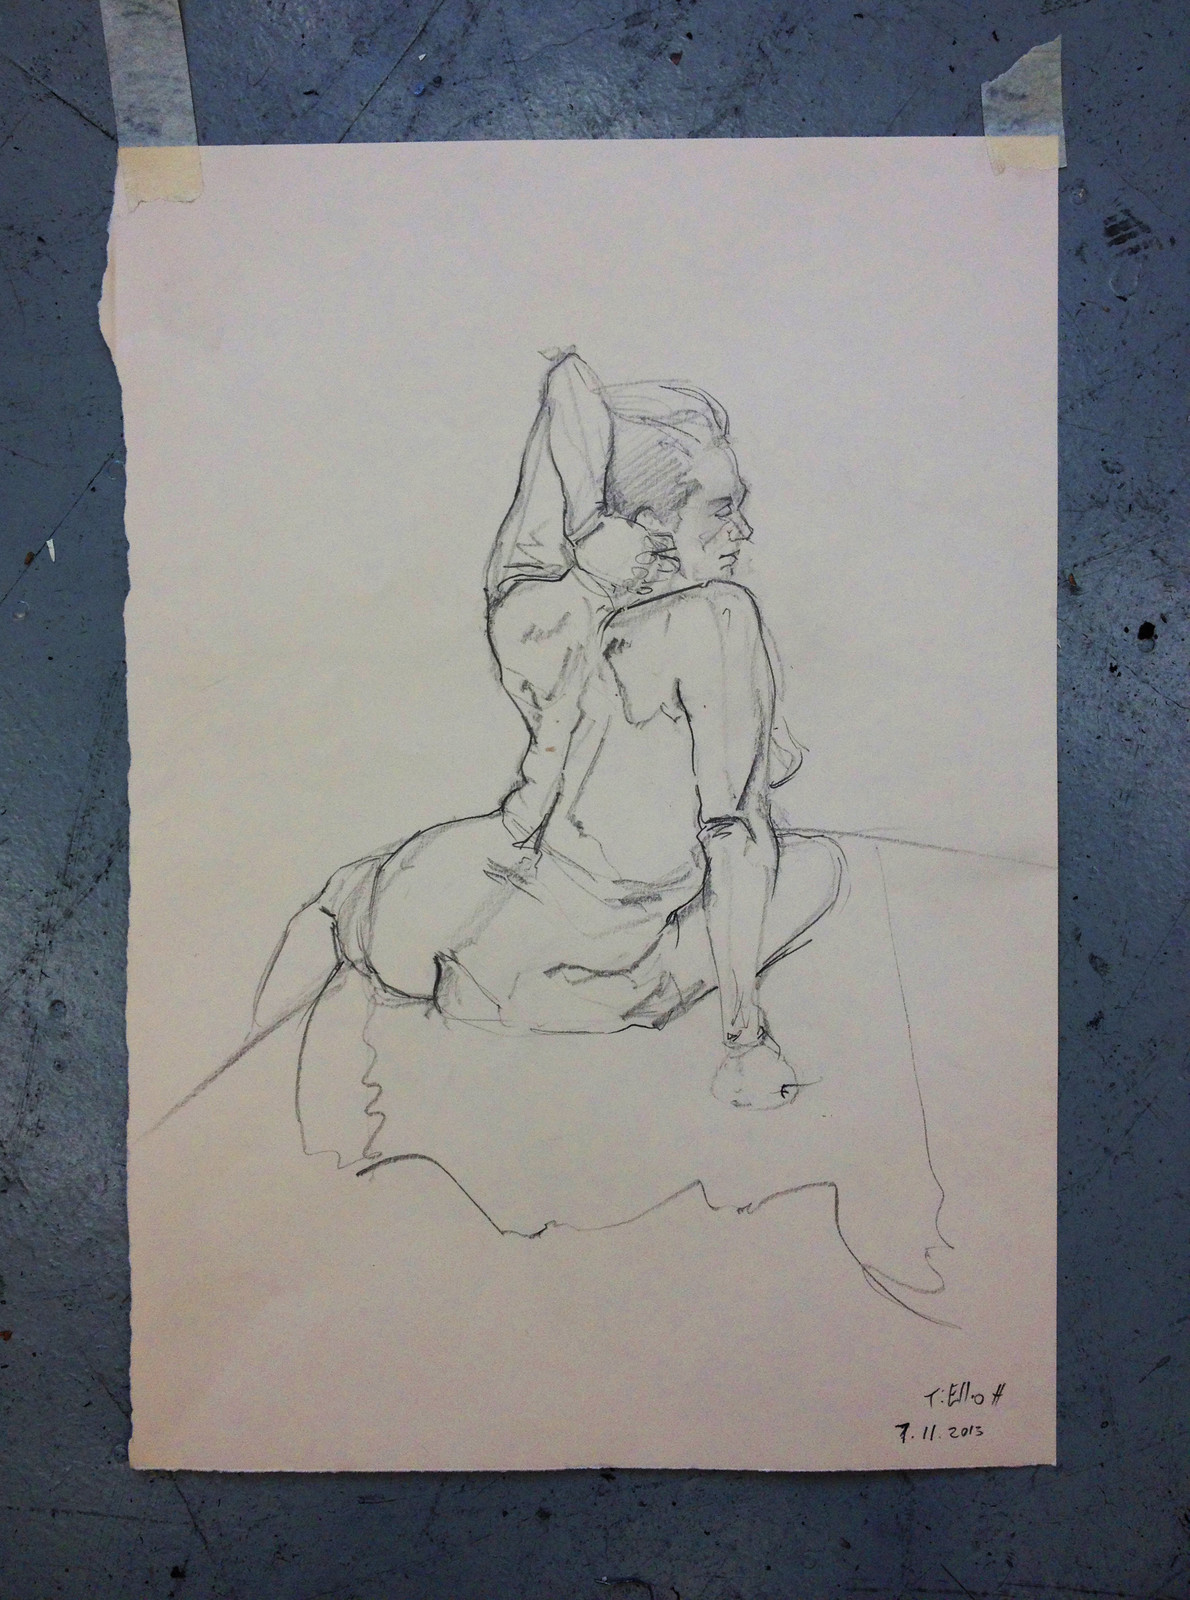 This is my personal favourite life drawing. Done in just 5 minutes at the tender age of 19